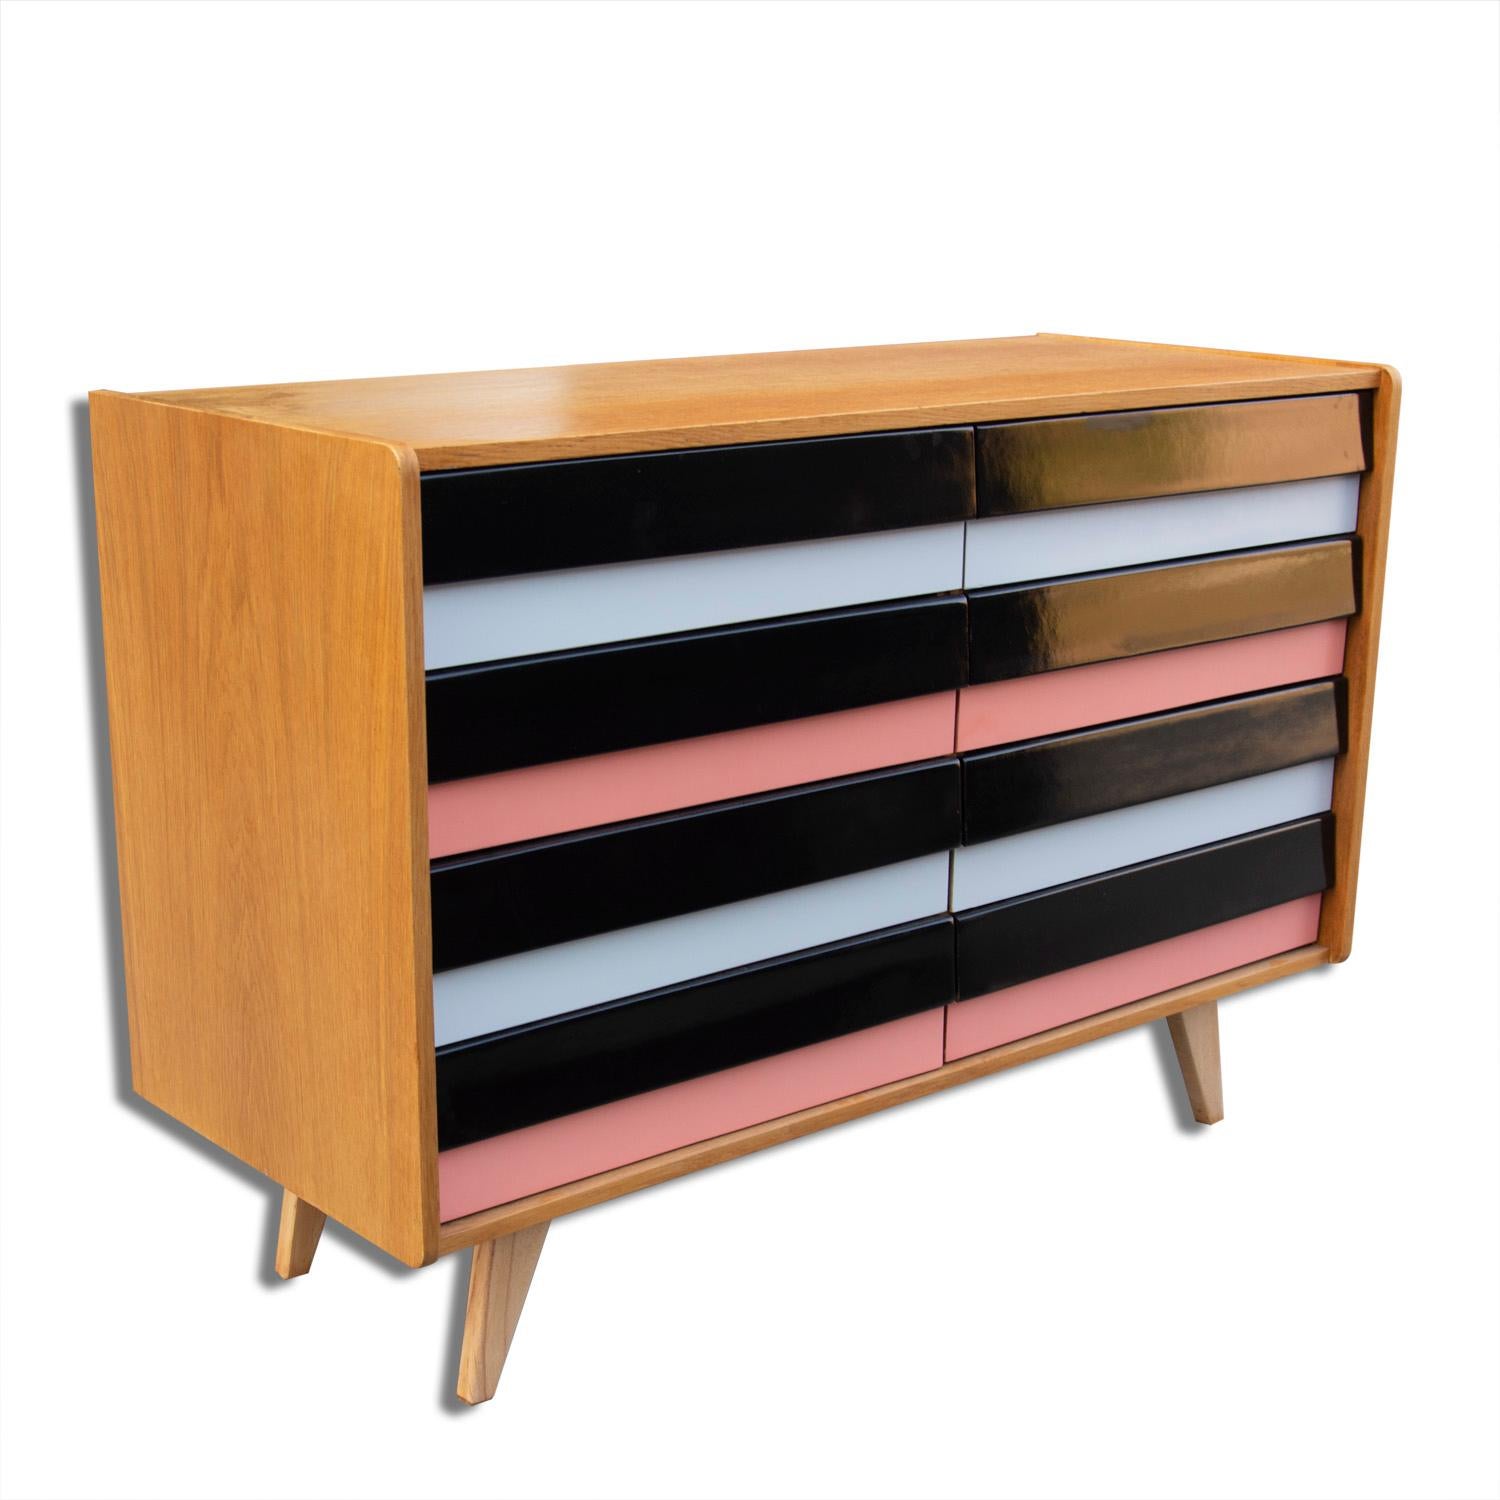 This beech and plywood chest of drawers, model U-458, was designed by Jirí Jiroutek and produced by Interier Praha during the 1960s. This model is associated with the world-renowned Brussels Period Expo 58 and features eight colored drawers. The